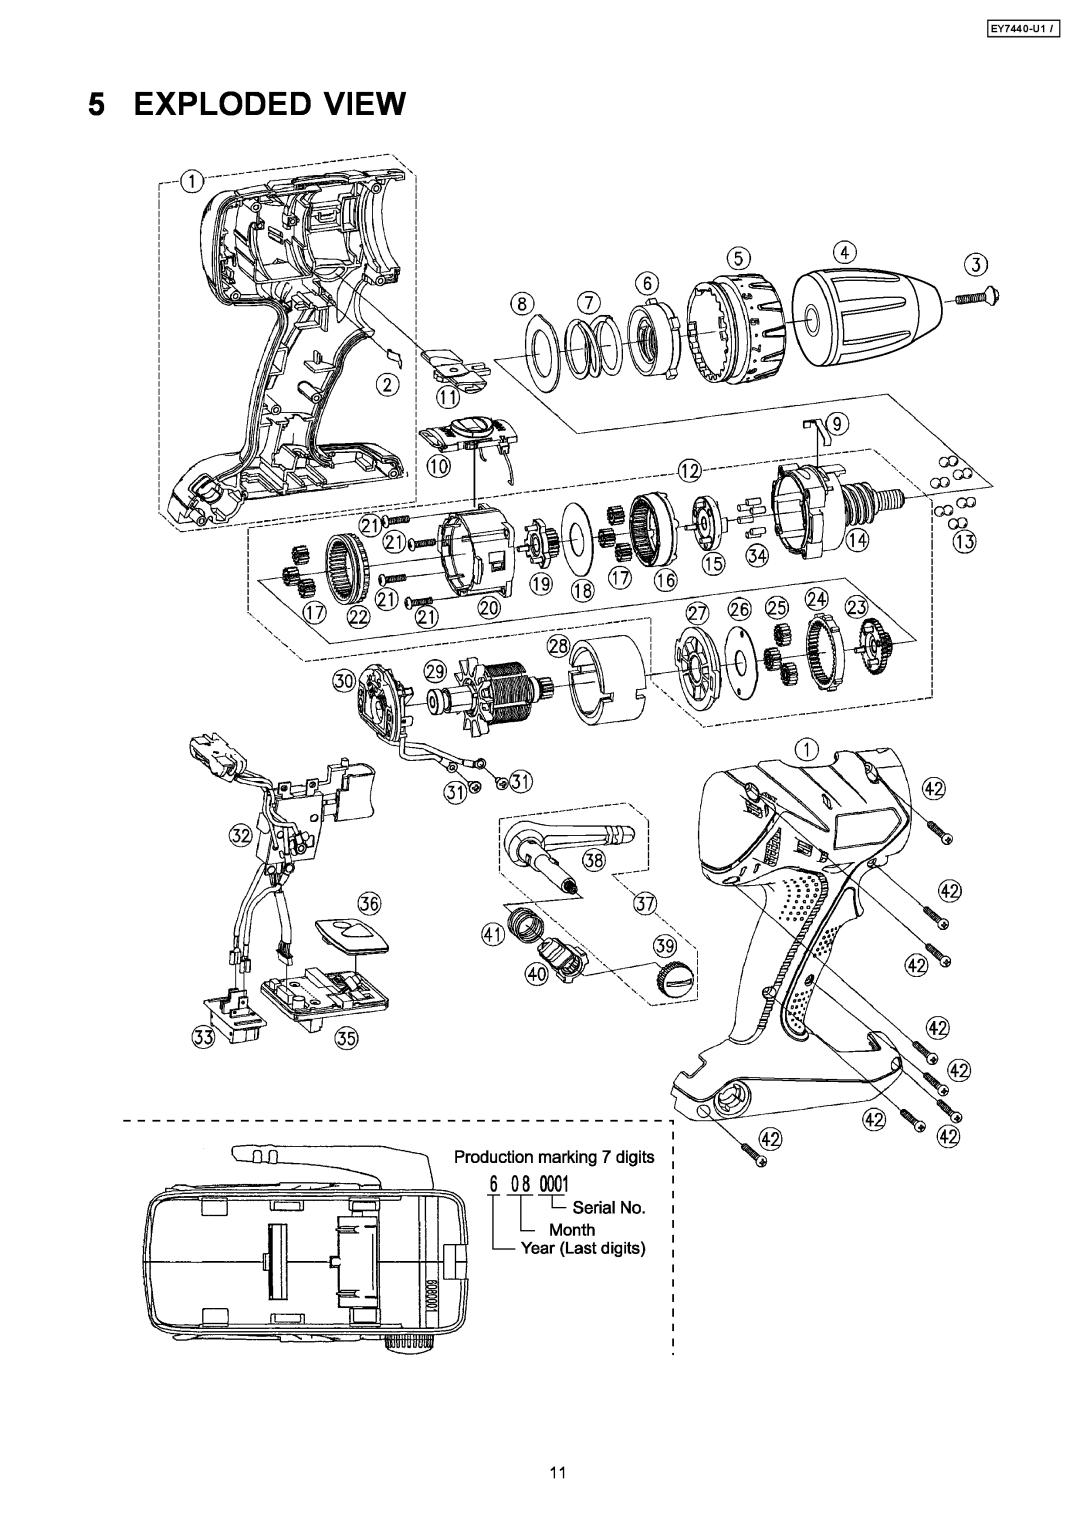 Panasonic EY7440-U1 specifications Exploded View 